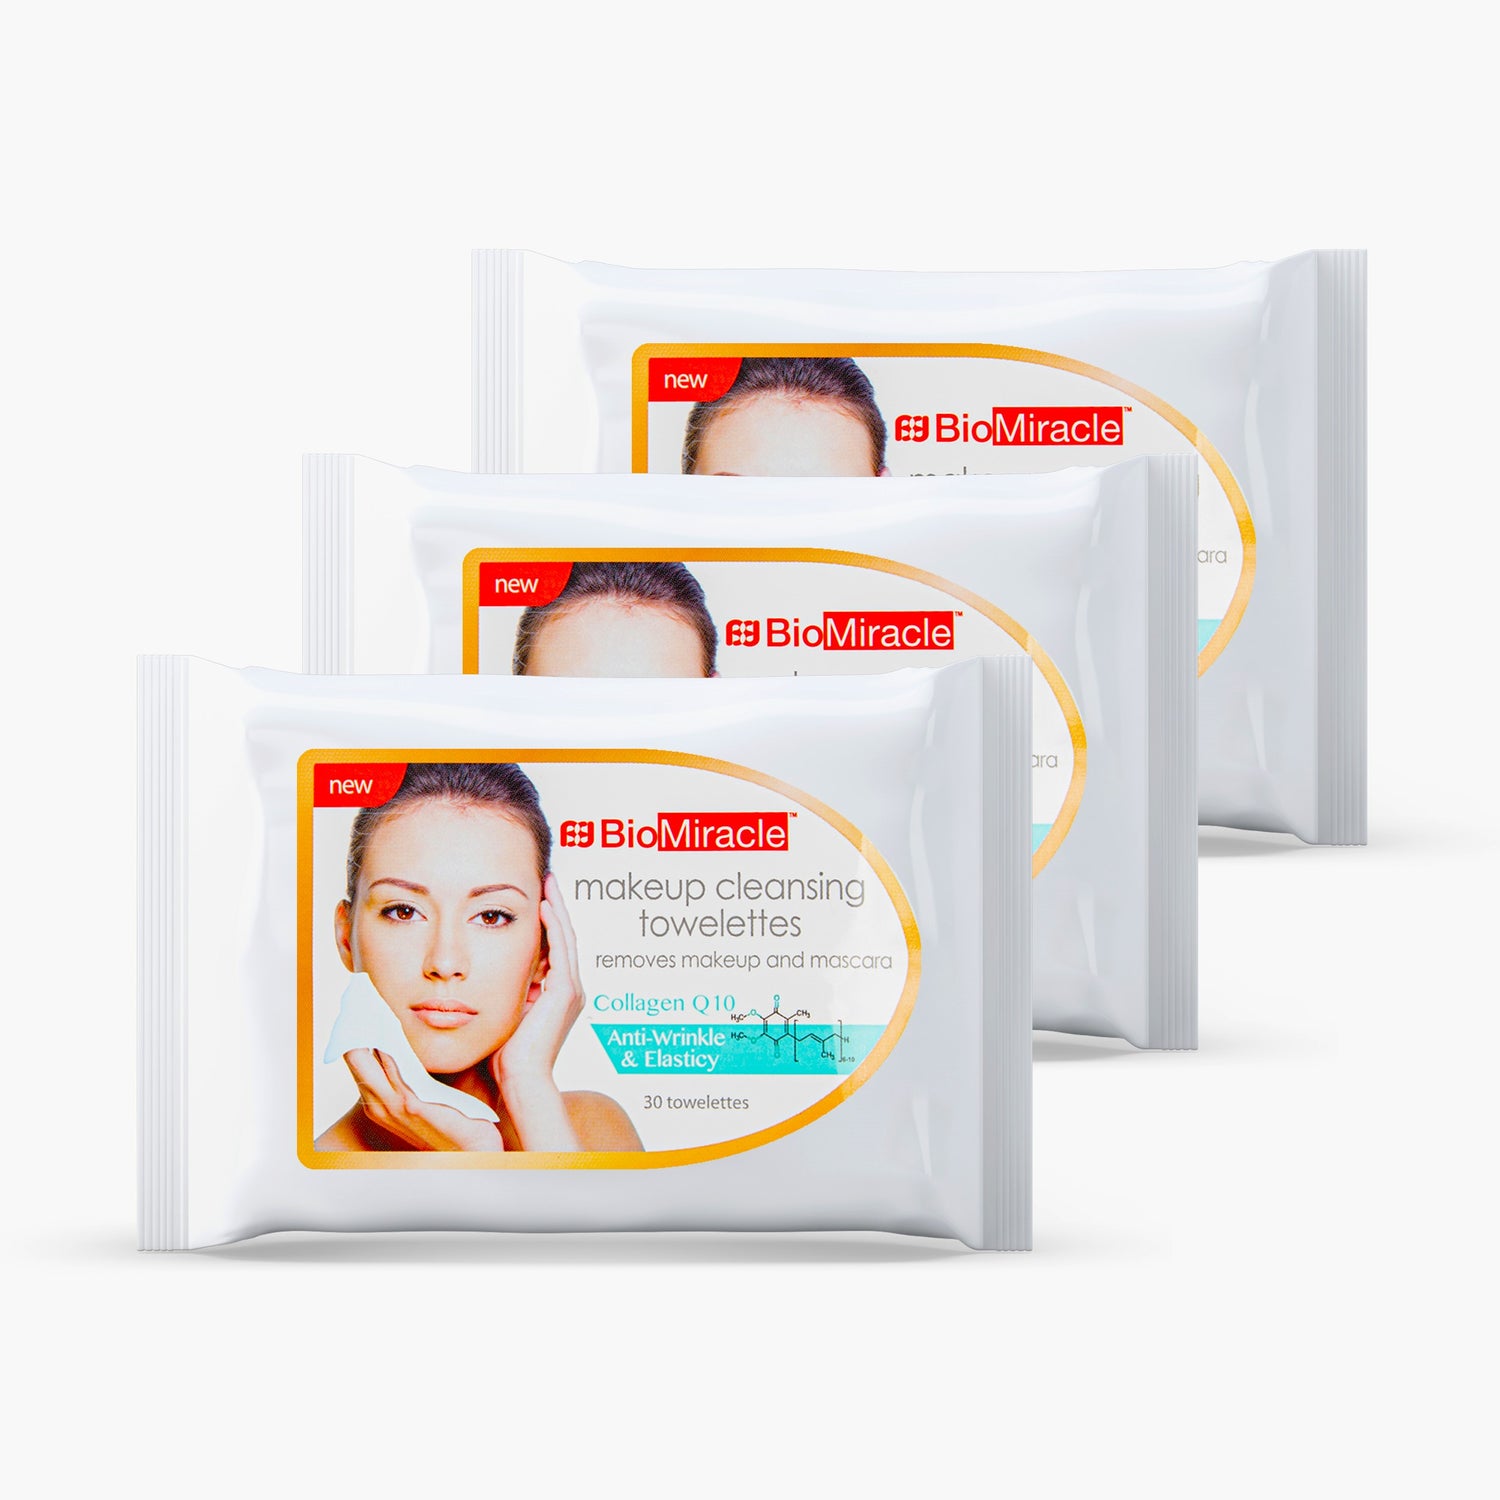 Q10 Collagen Makeup Cleansing Towelettes-3 Pack